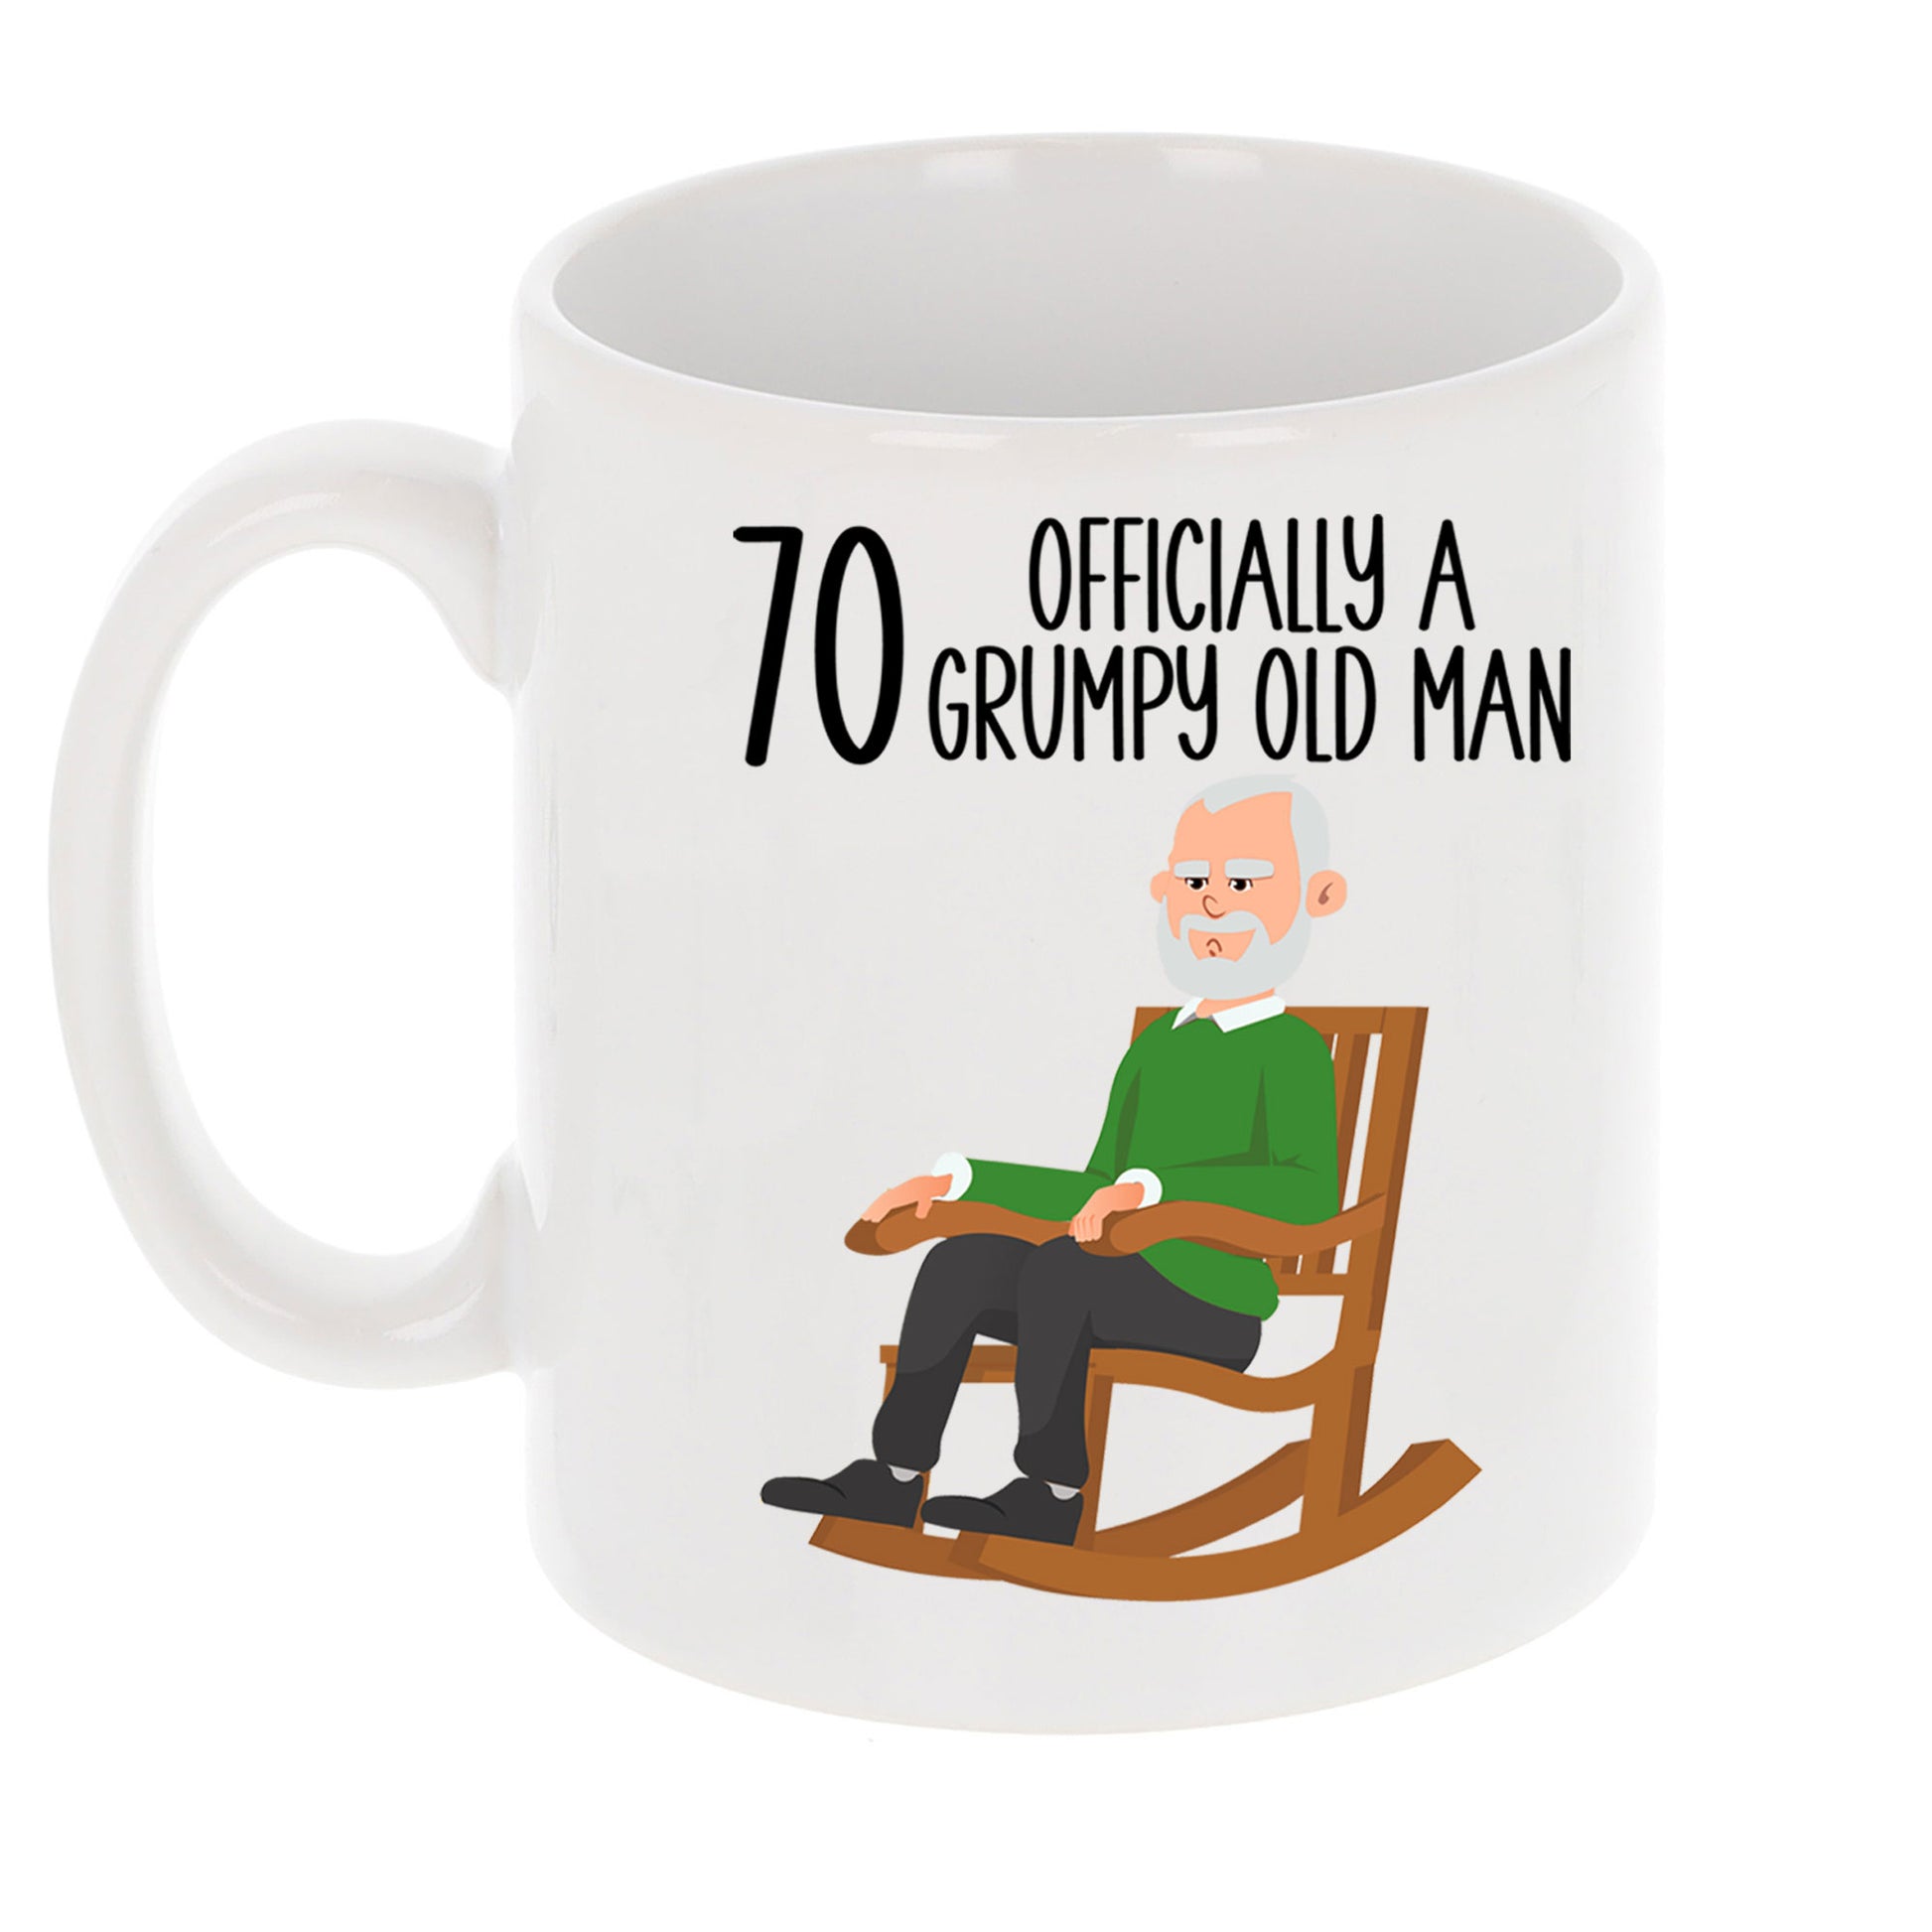 70 Officially A Grumpy Old Man Mug and/or Coaster Gift  - Always Looking Good - Mug On Its Own  